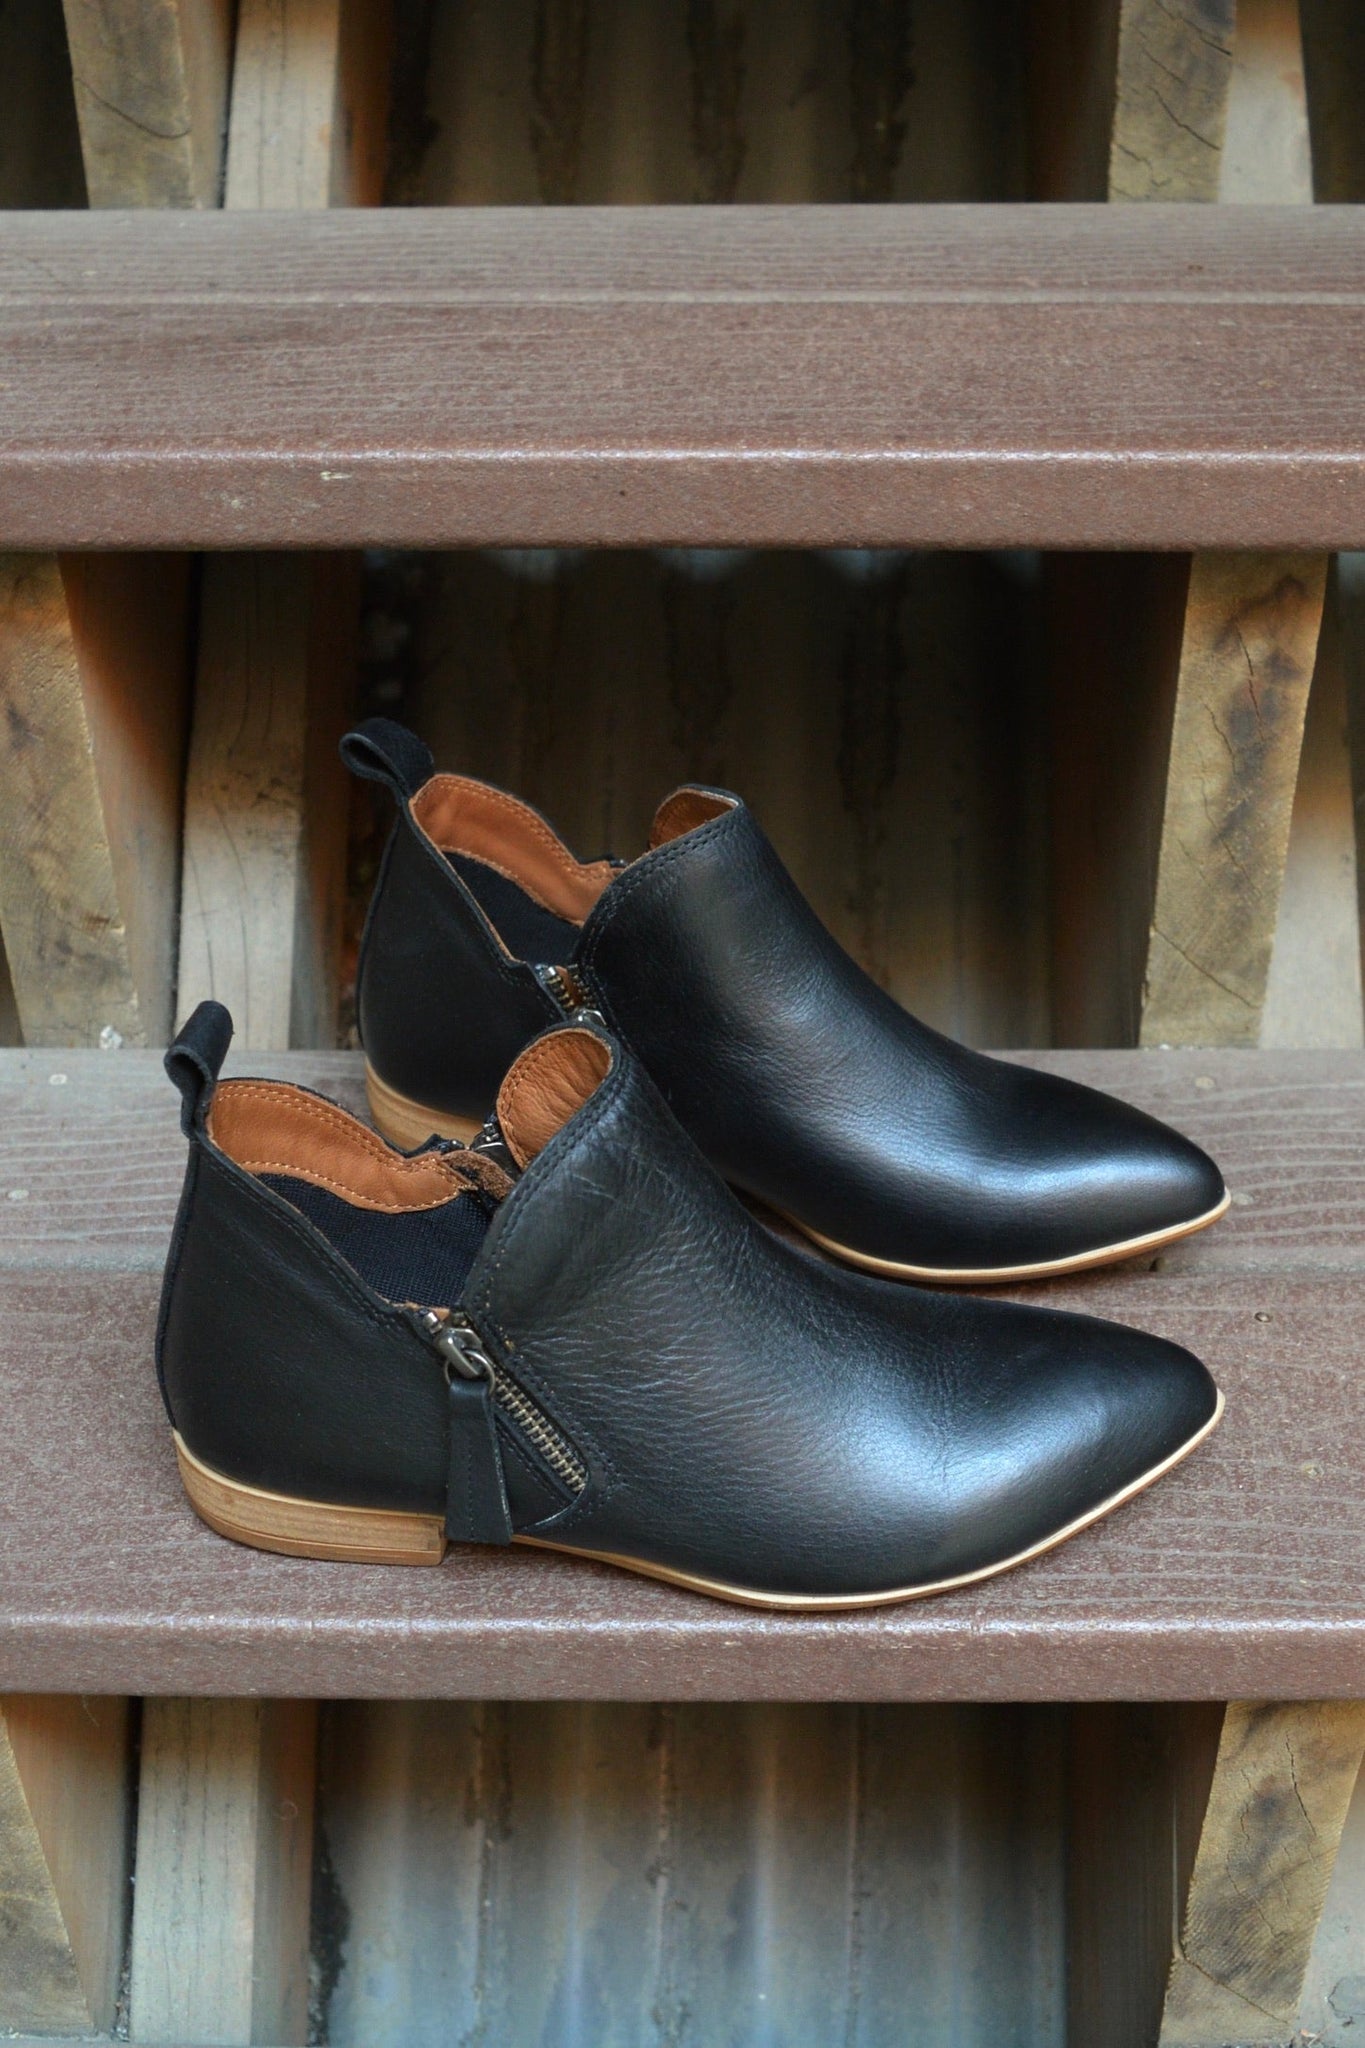 Shop Bueno Boots and Shoes at Shoes for the Soul